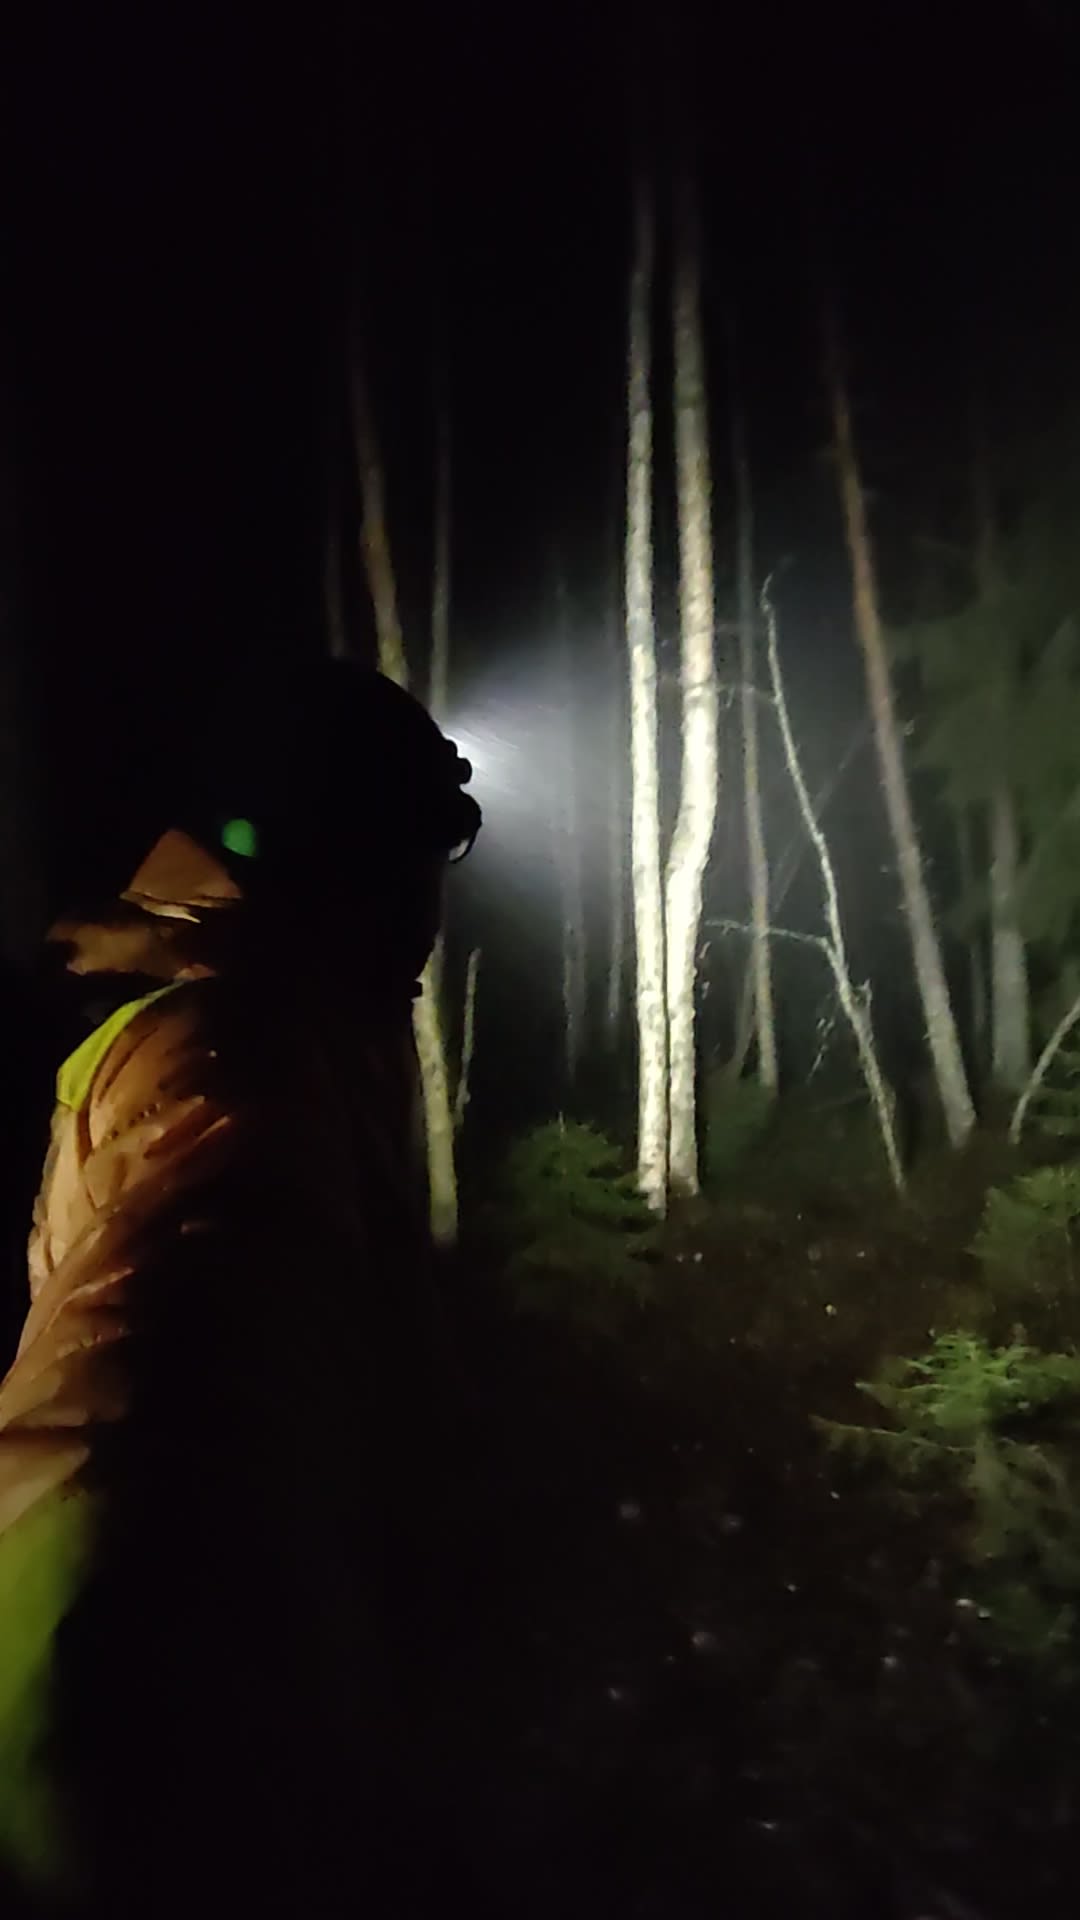 A photo of a person in a dark forest looking at some trees with a head lamp.